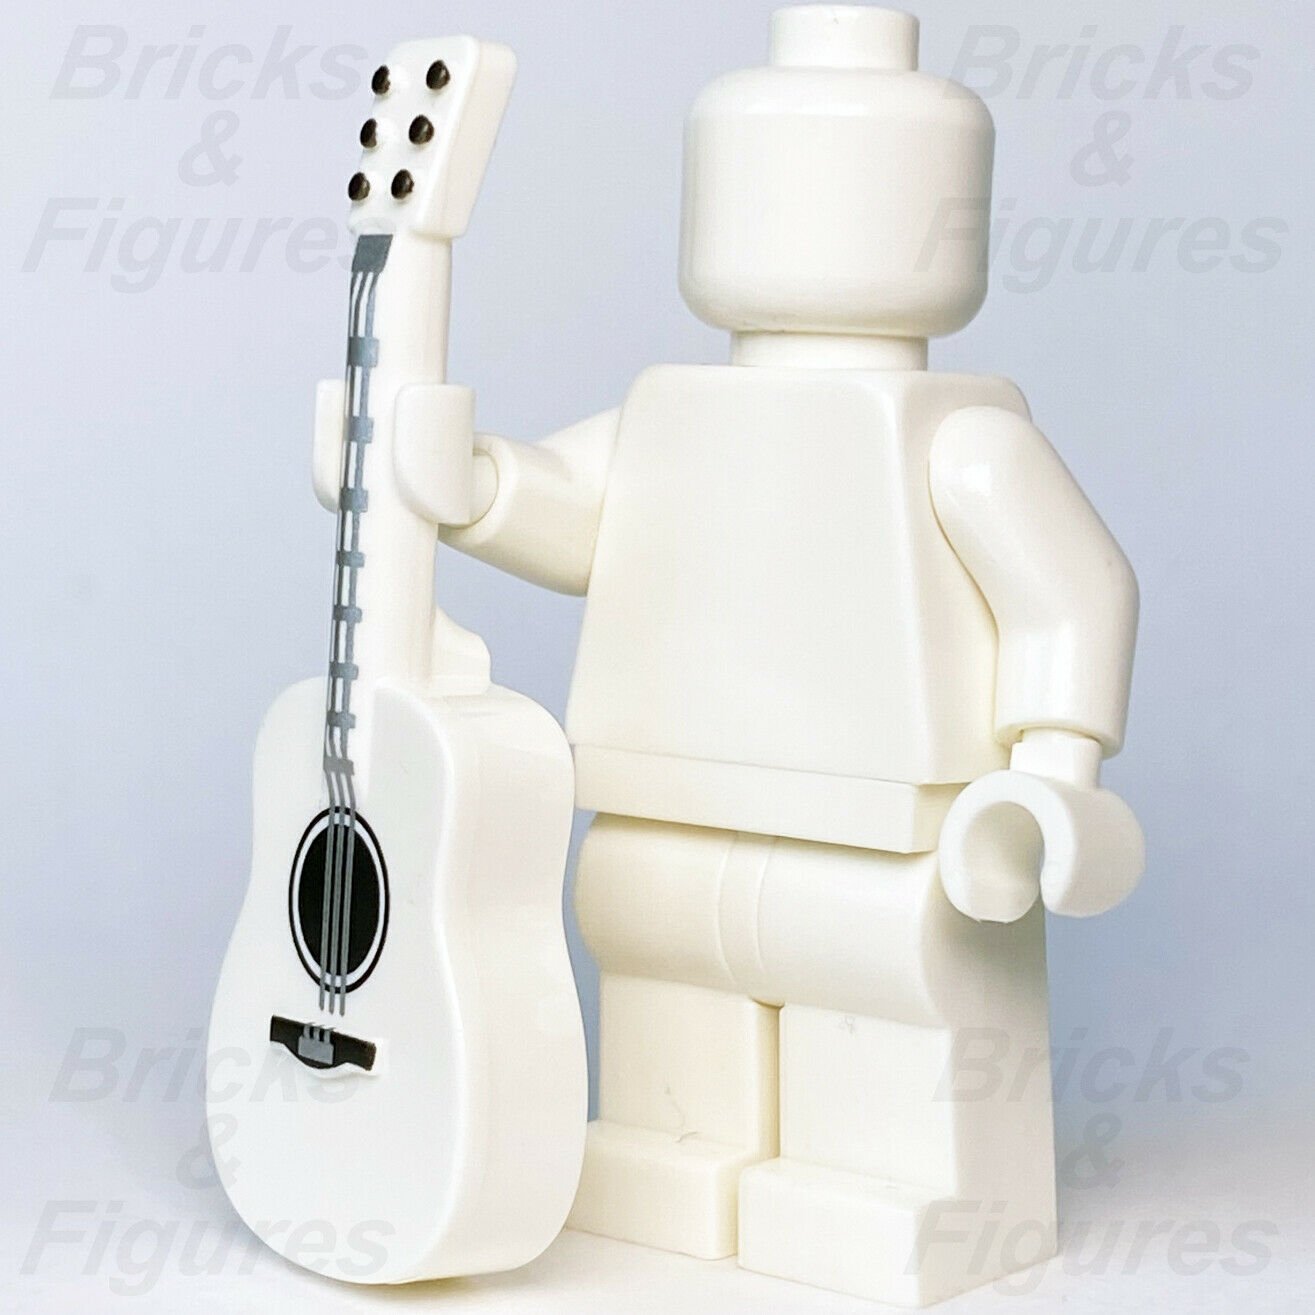 New Ninjago LEGO White Acoustic Guitar with Silver Strings Part 71735